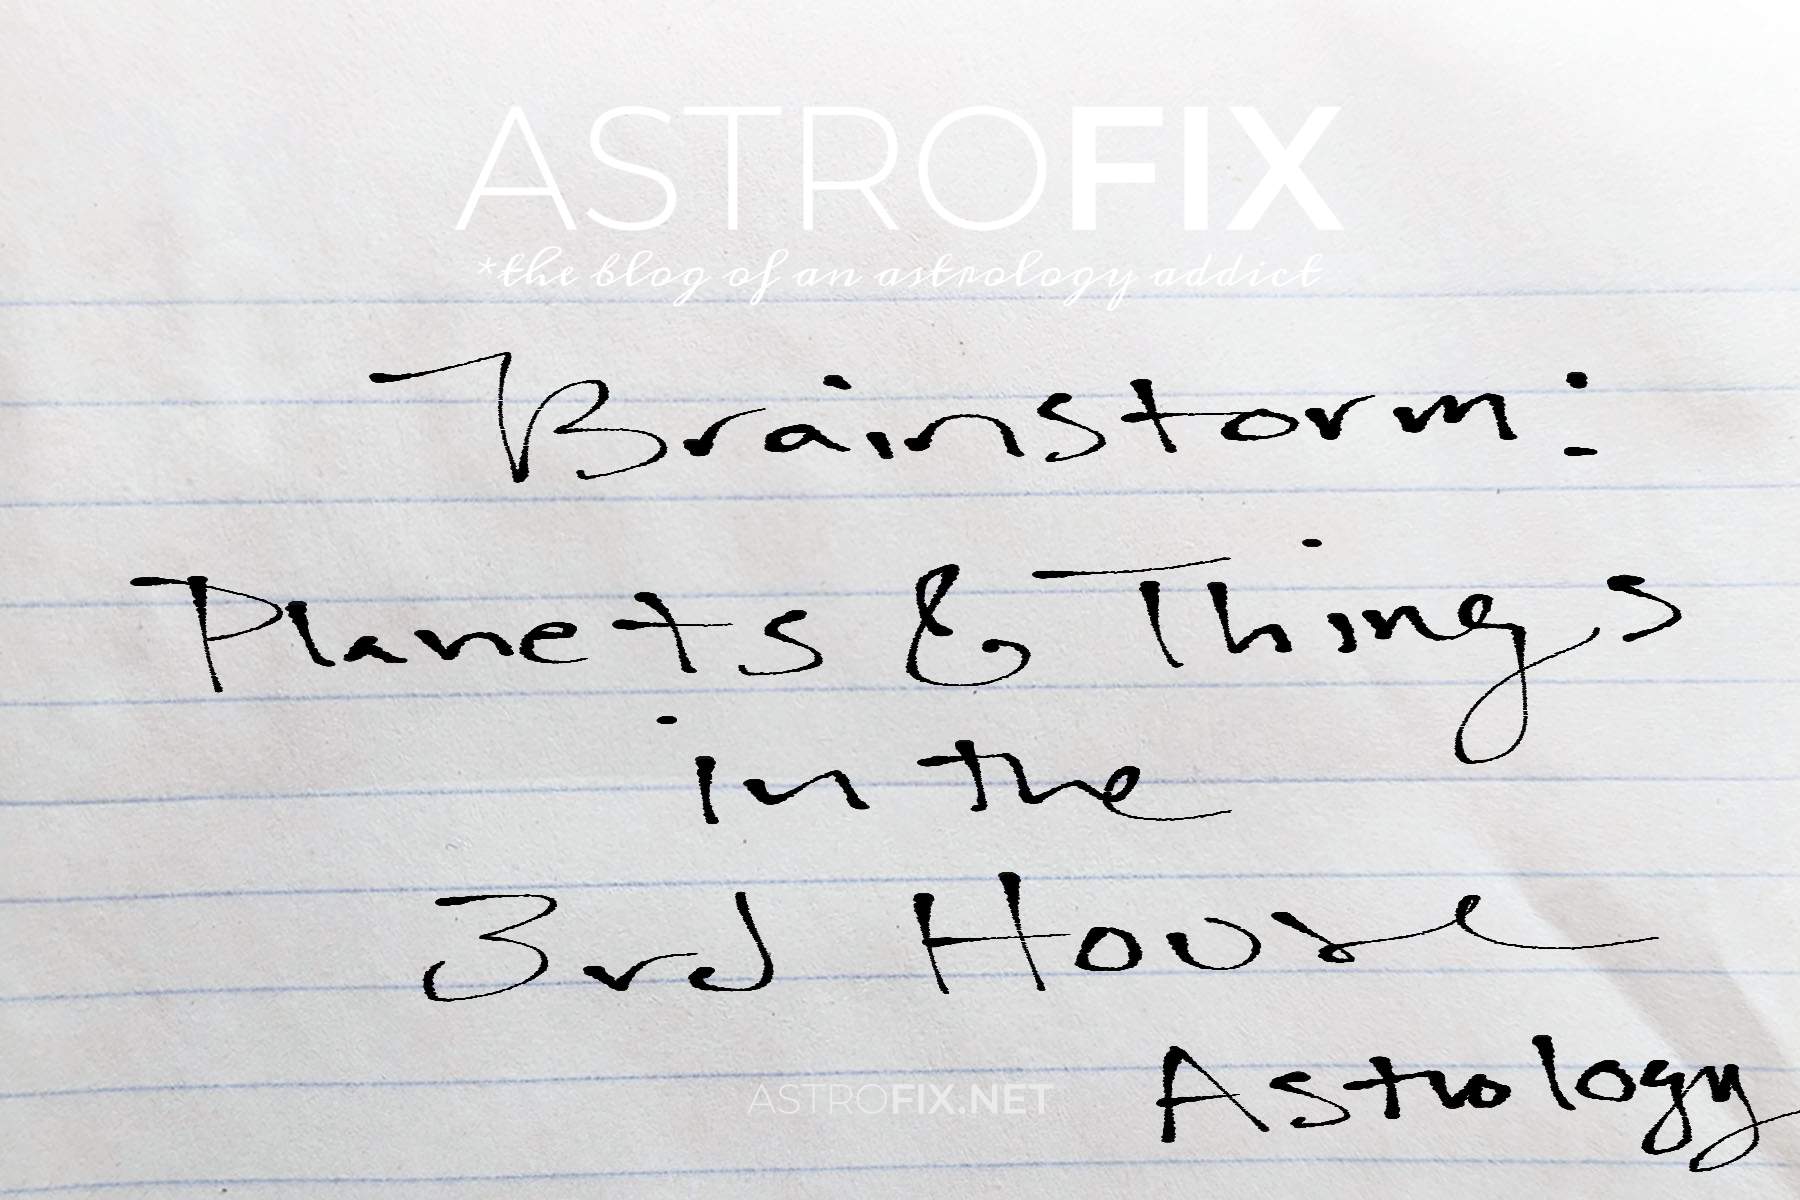 brainstorm-planets-things-in-the-3rd-house-astrology